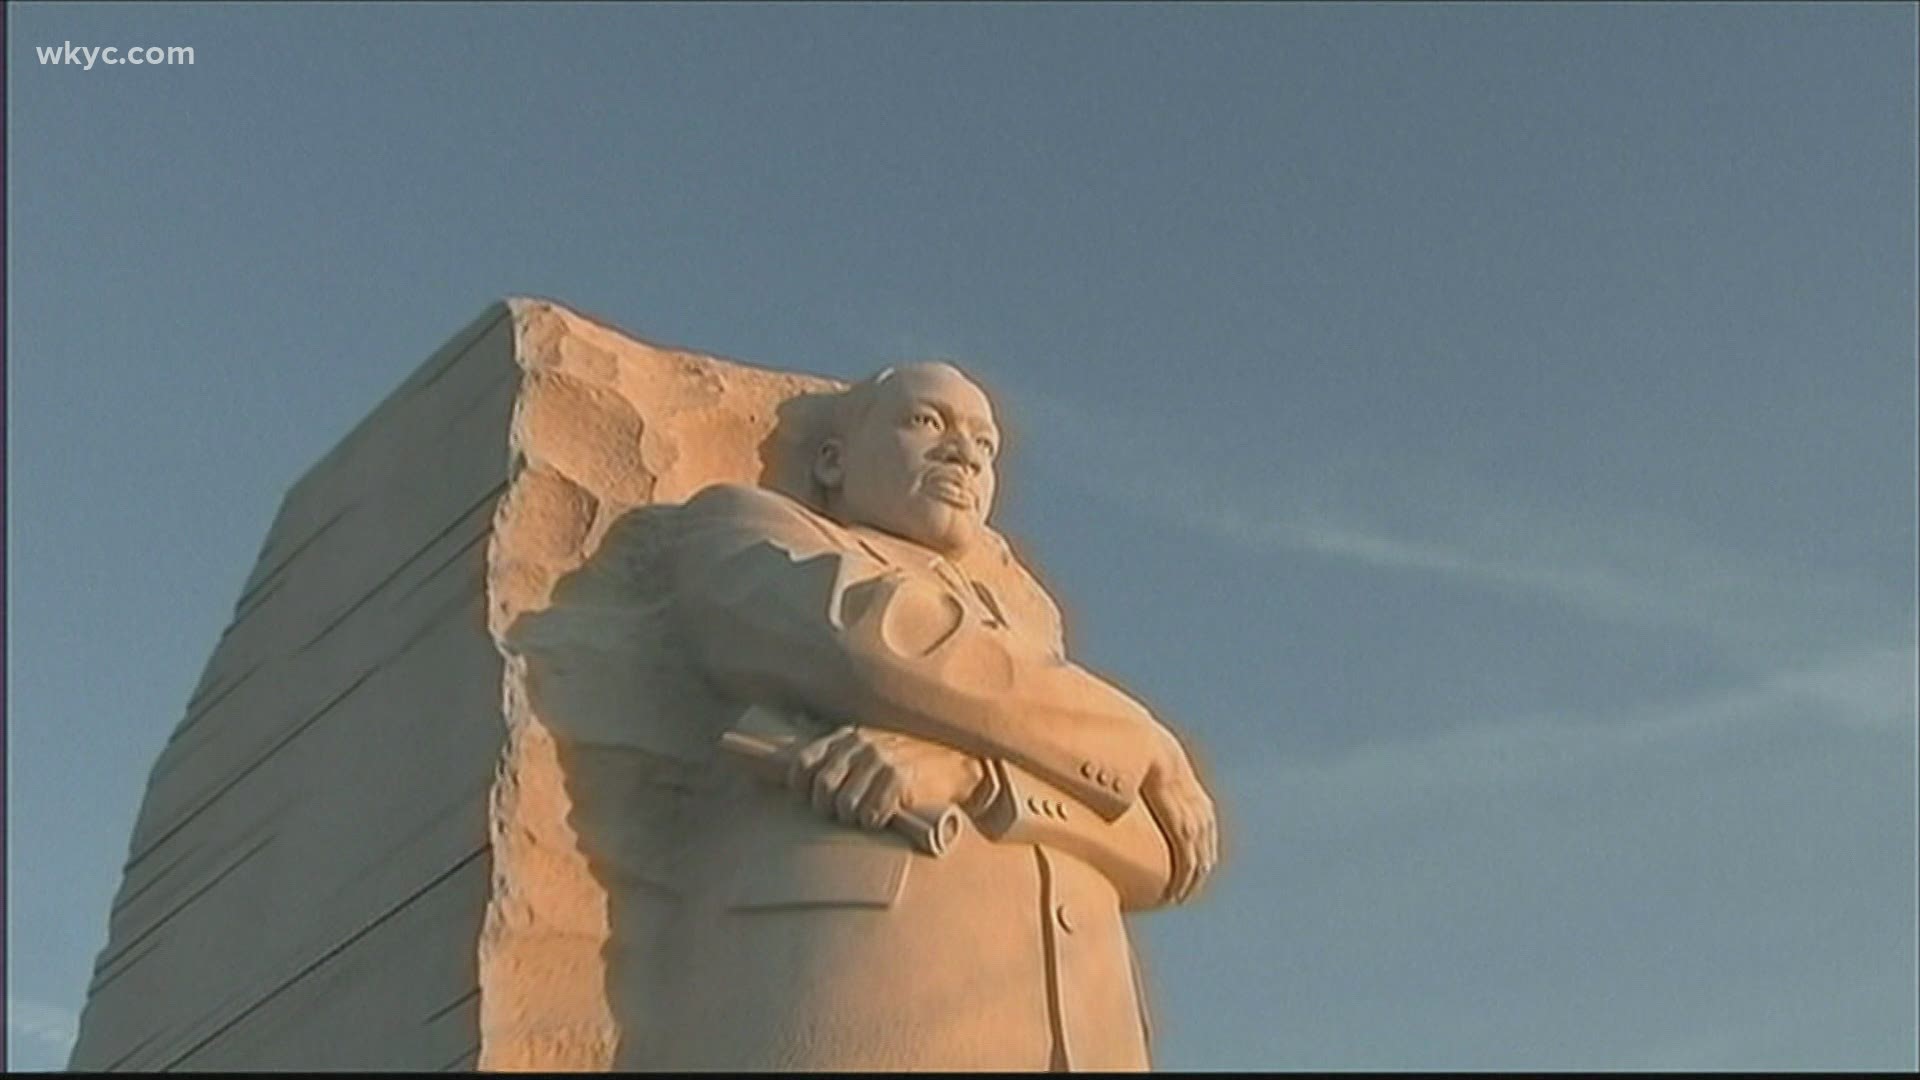 Northeast Ohio was home to several service-driven events honoring the life of MLK Jr, today. Across the country, people remembered and gave back, as well.